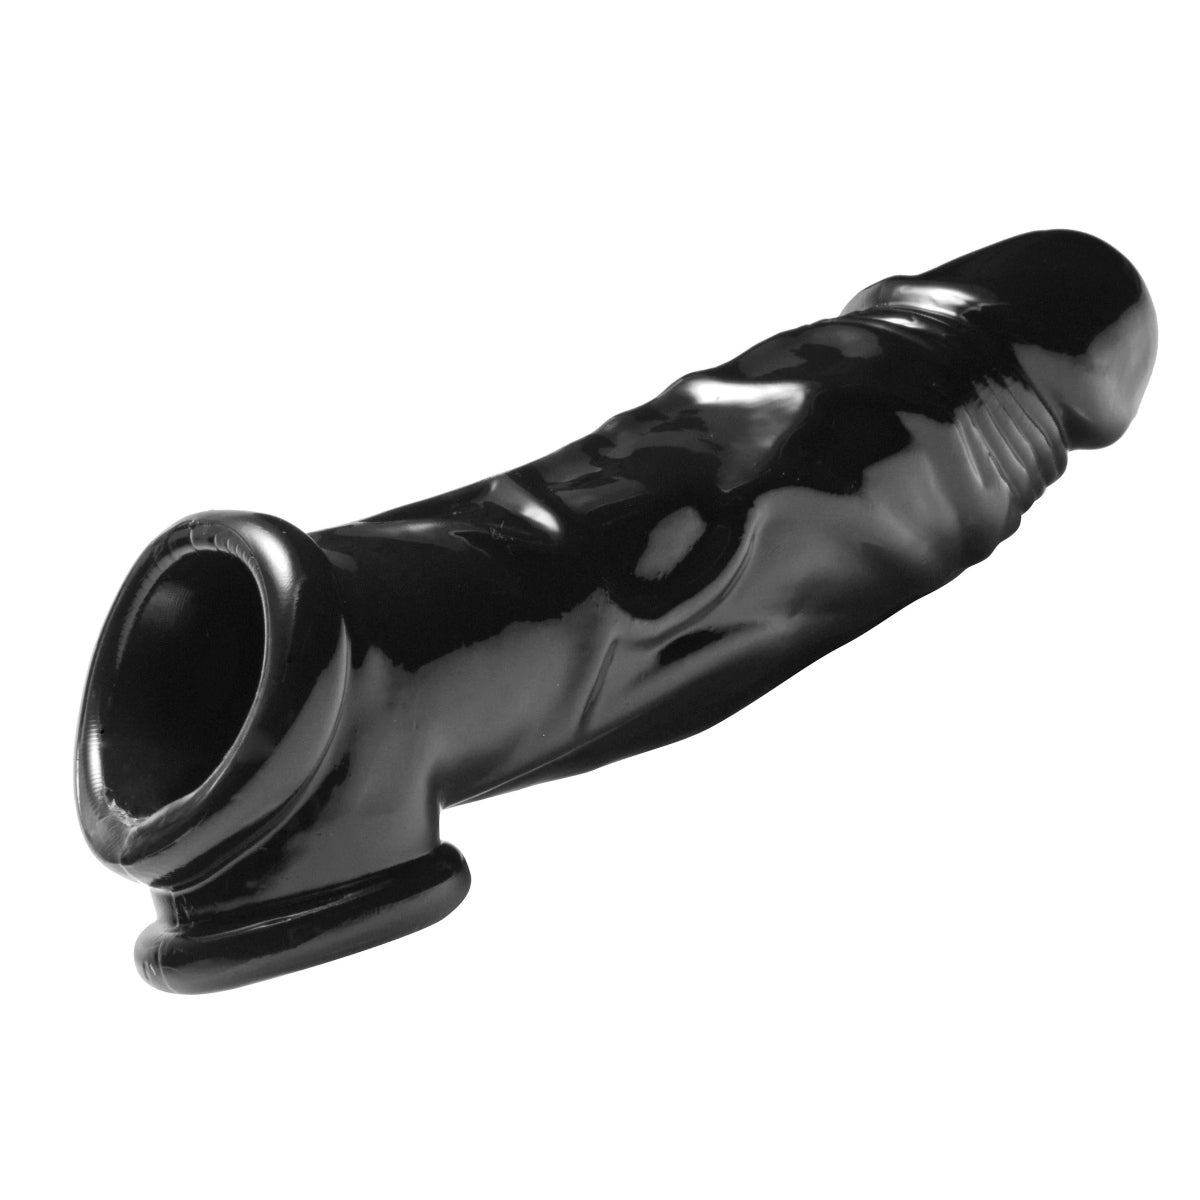 Master Series Fuck Tool Penis Sheath And Ball Stretcher Black